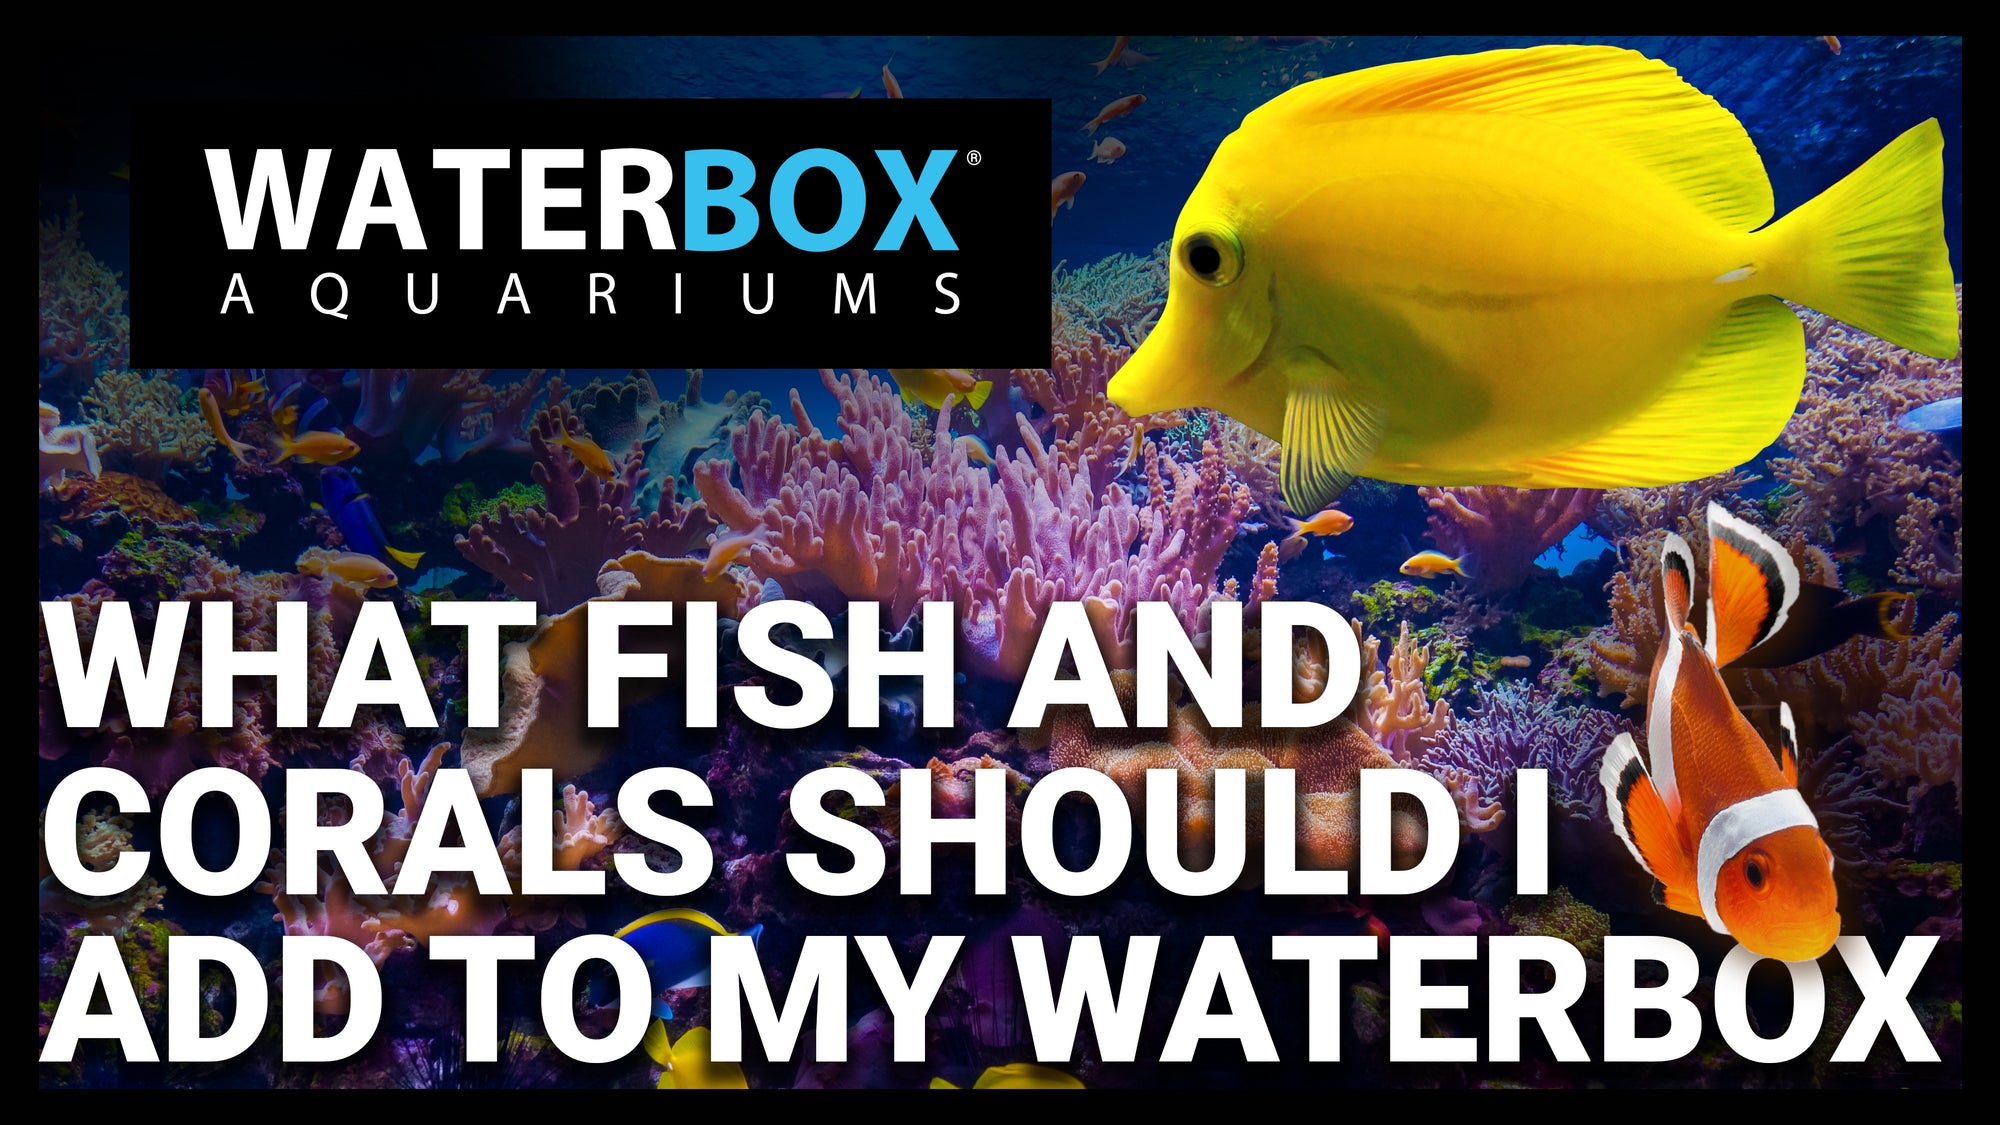 What Fish and Corals Should I Add to My Waterbox?